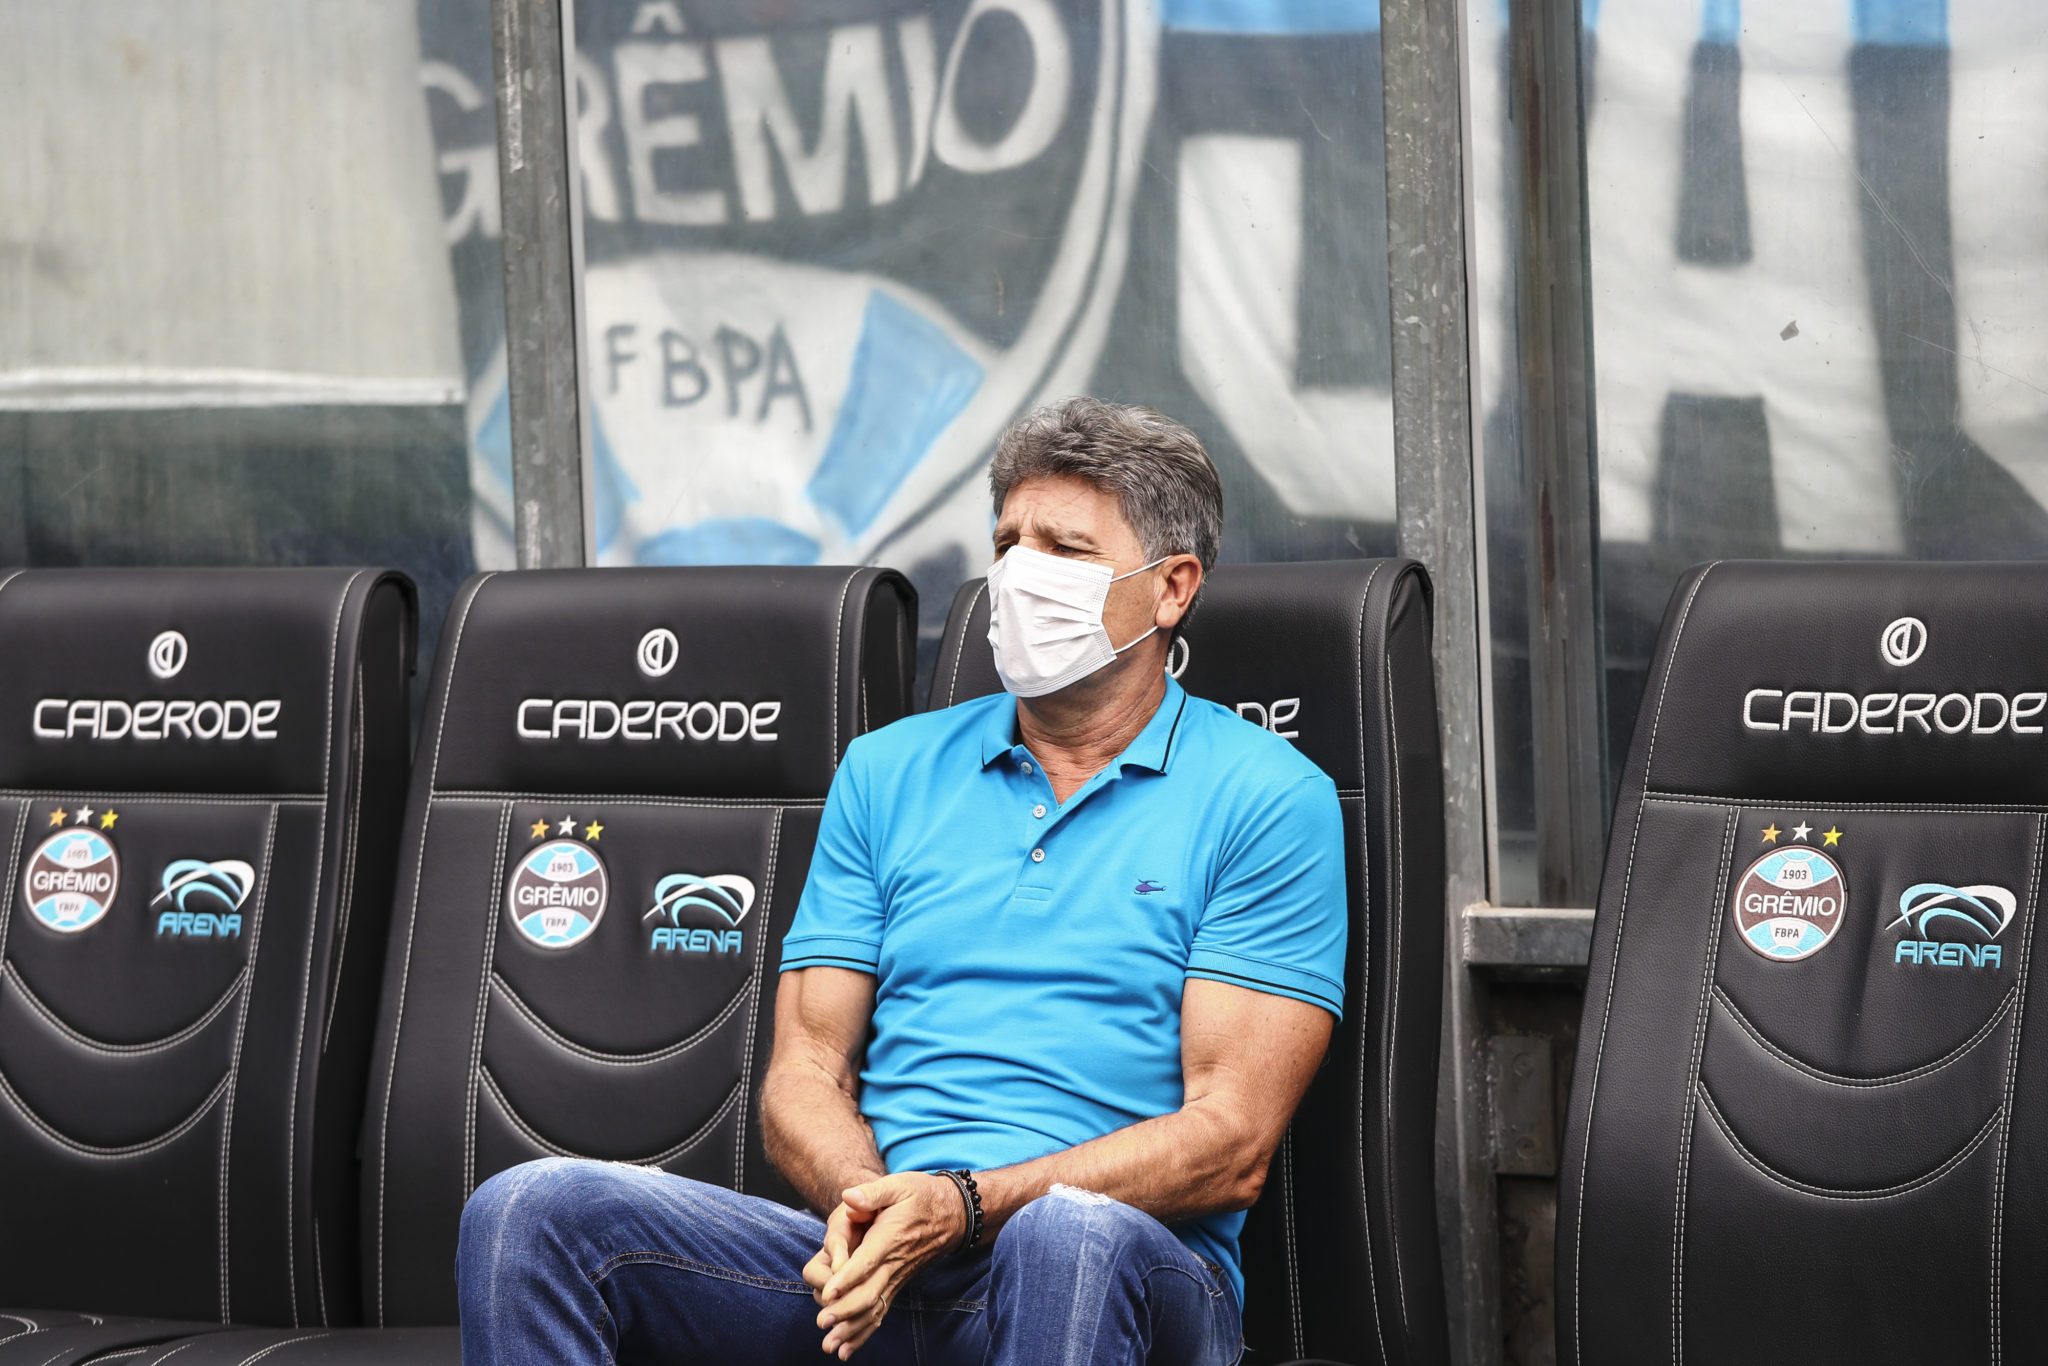 PORTO ALEGRE, BRAZIL - MARCH 15: Renato Portaluppi coach of Gremio enter the field wearing masks before the match between Gremio and Sao Luiz as part of the Rio Grande do Sul State Championship 2020, to be played behind closed doors at Arena do Gremio Stadium, on March 15, 2020 in Porto Alegre, Brazil. The Government of the State of Rio Grande do Sul issued a list of new guidelines to help prevent the spread of the Coronavirus which included games played with closed doors and no public. According to the Ministry of Health, as of Saturday, March 14, Brazil had 121 confirmed cases of coronavirus. (Photo by Lucas Uebel/Getty Images)